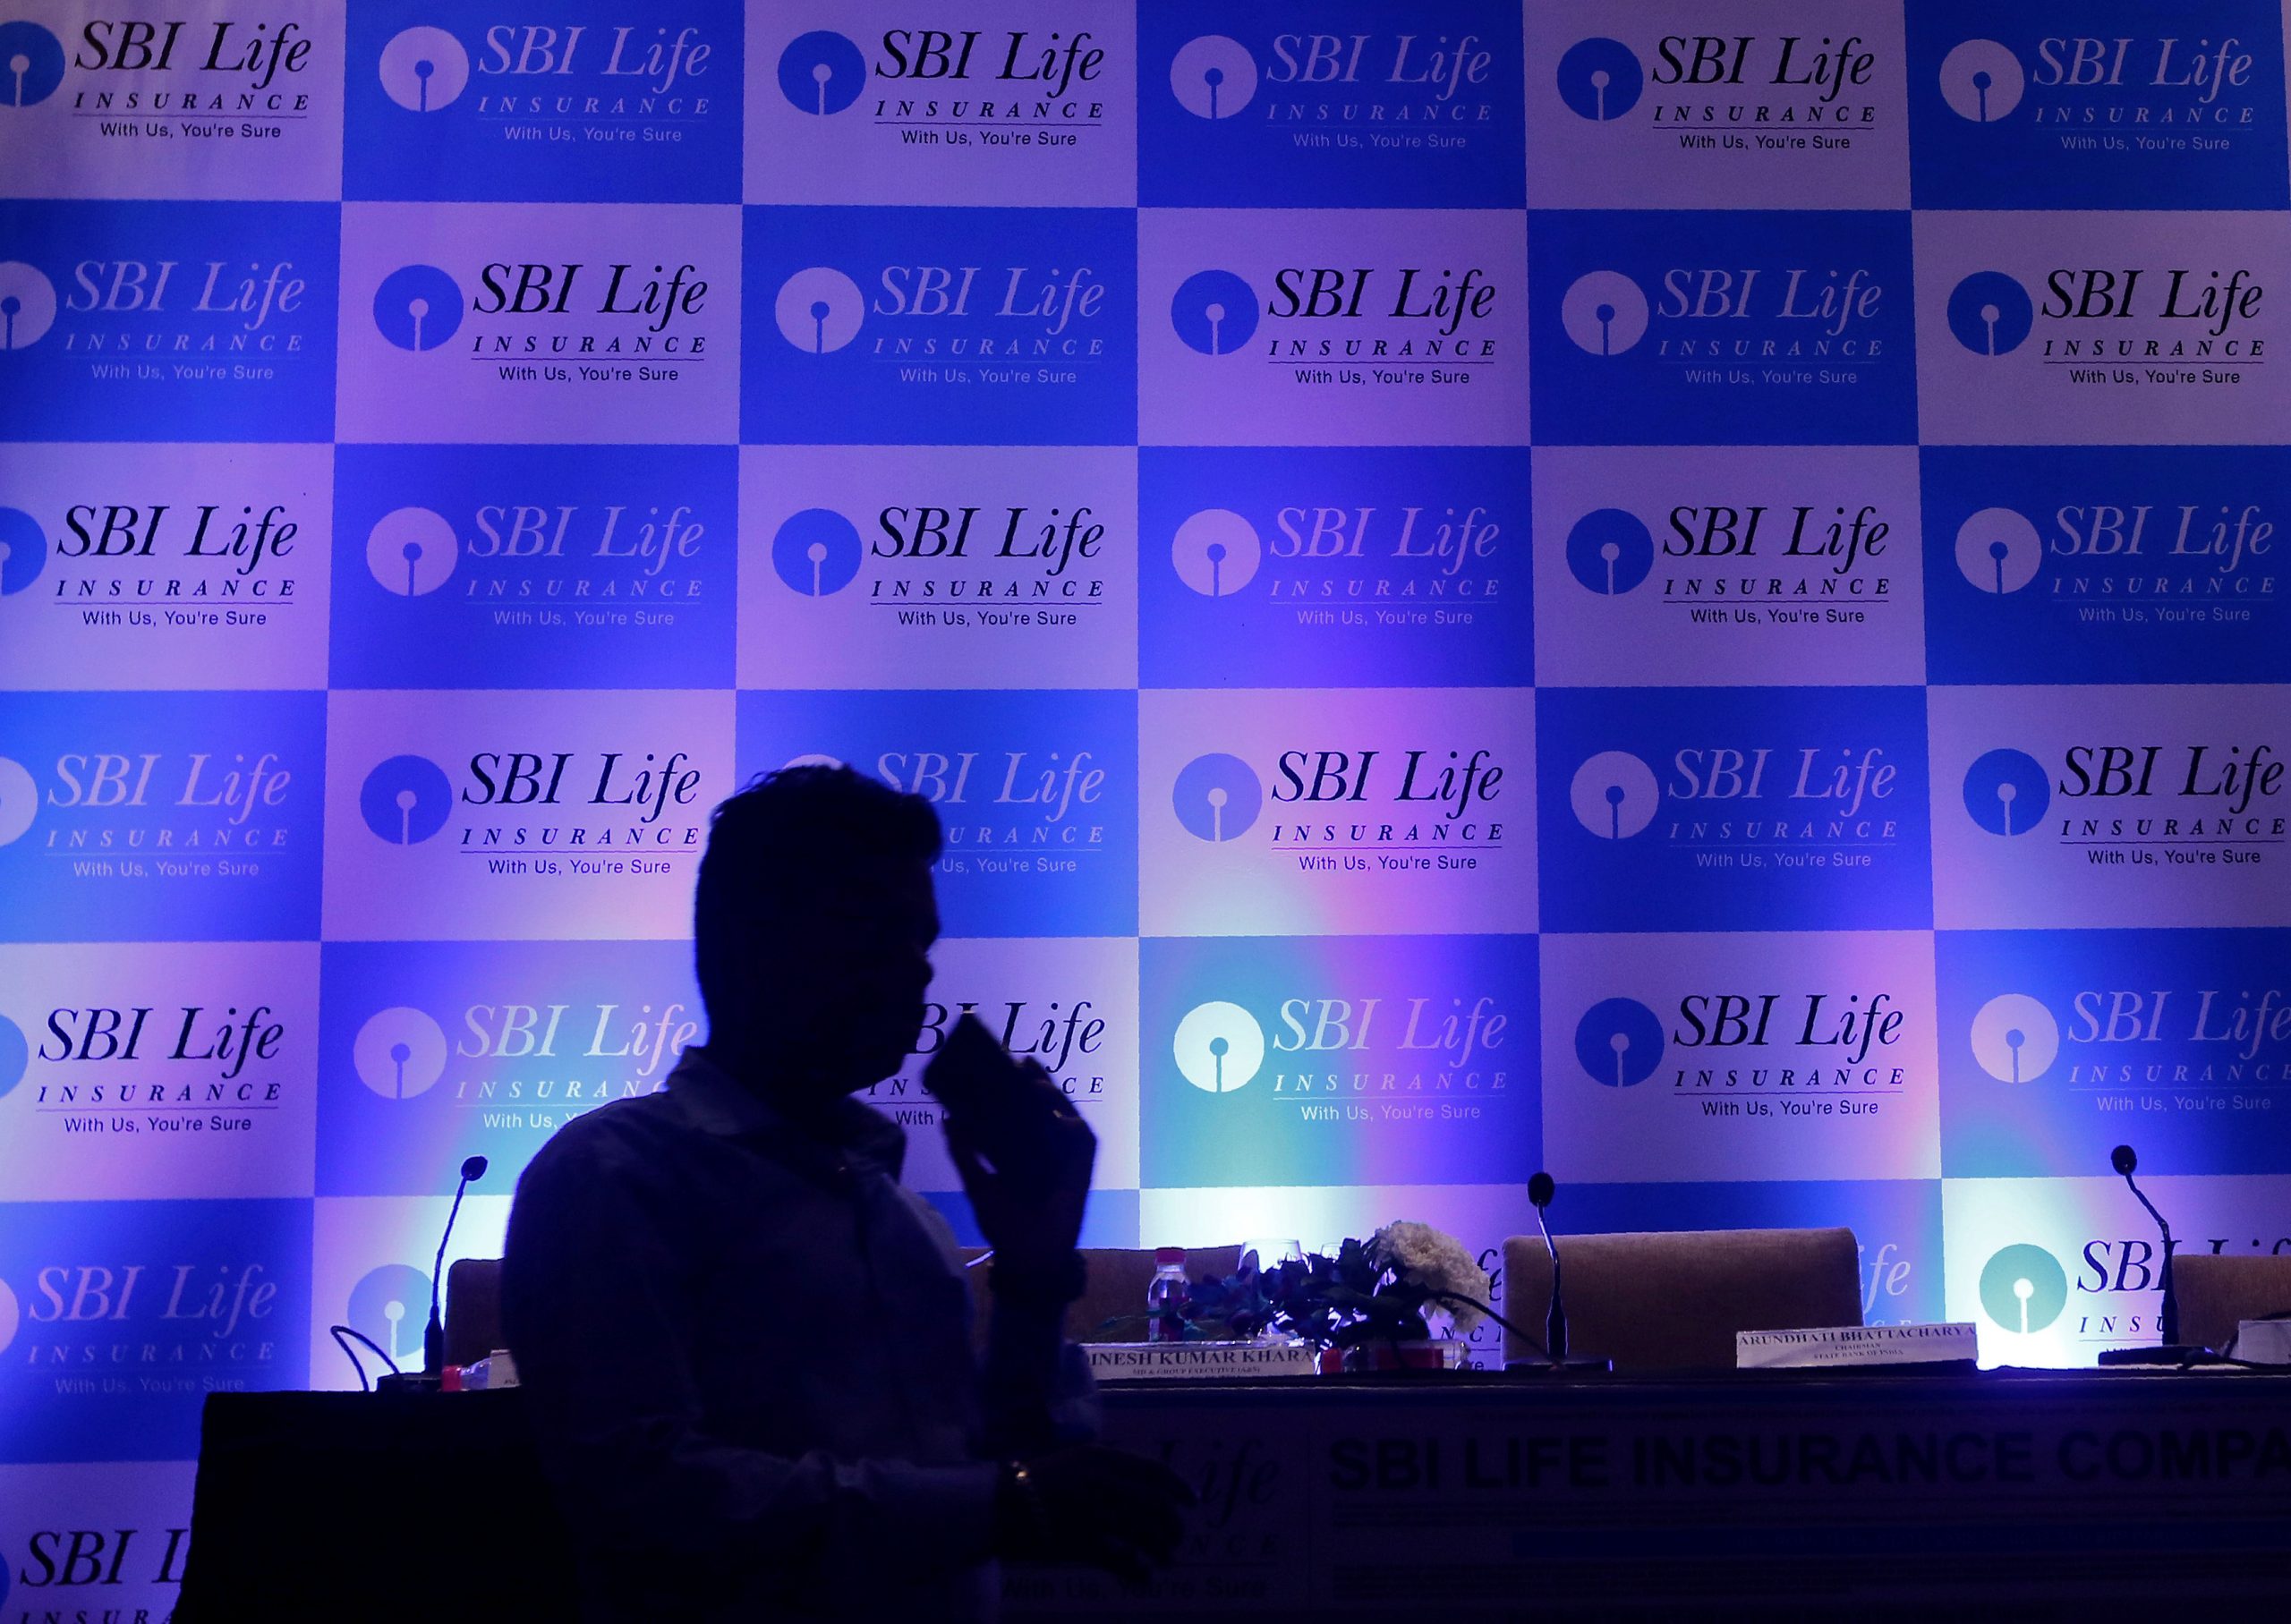 sbi life insurance coverage second quarter web revenue rose 53 on 12 months scaled